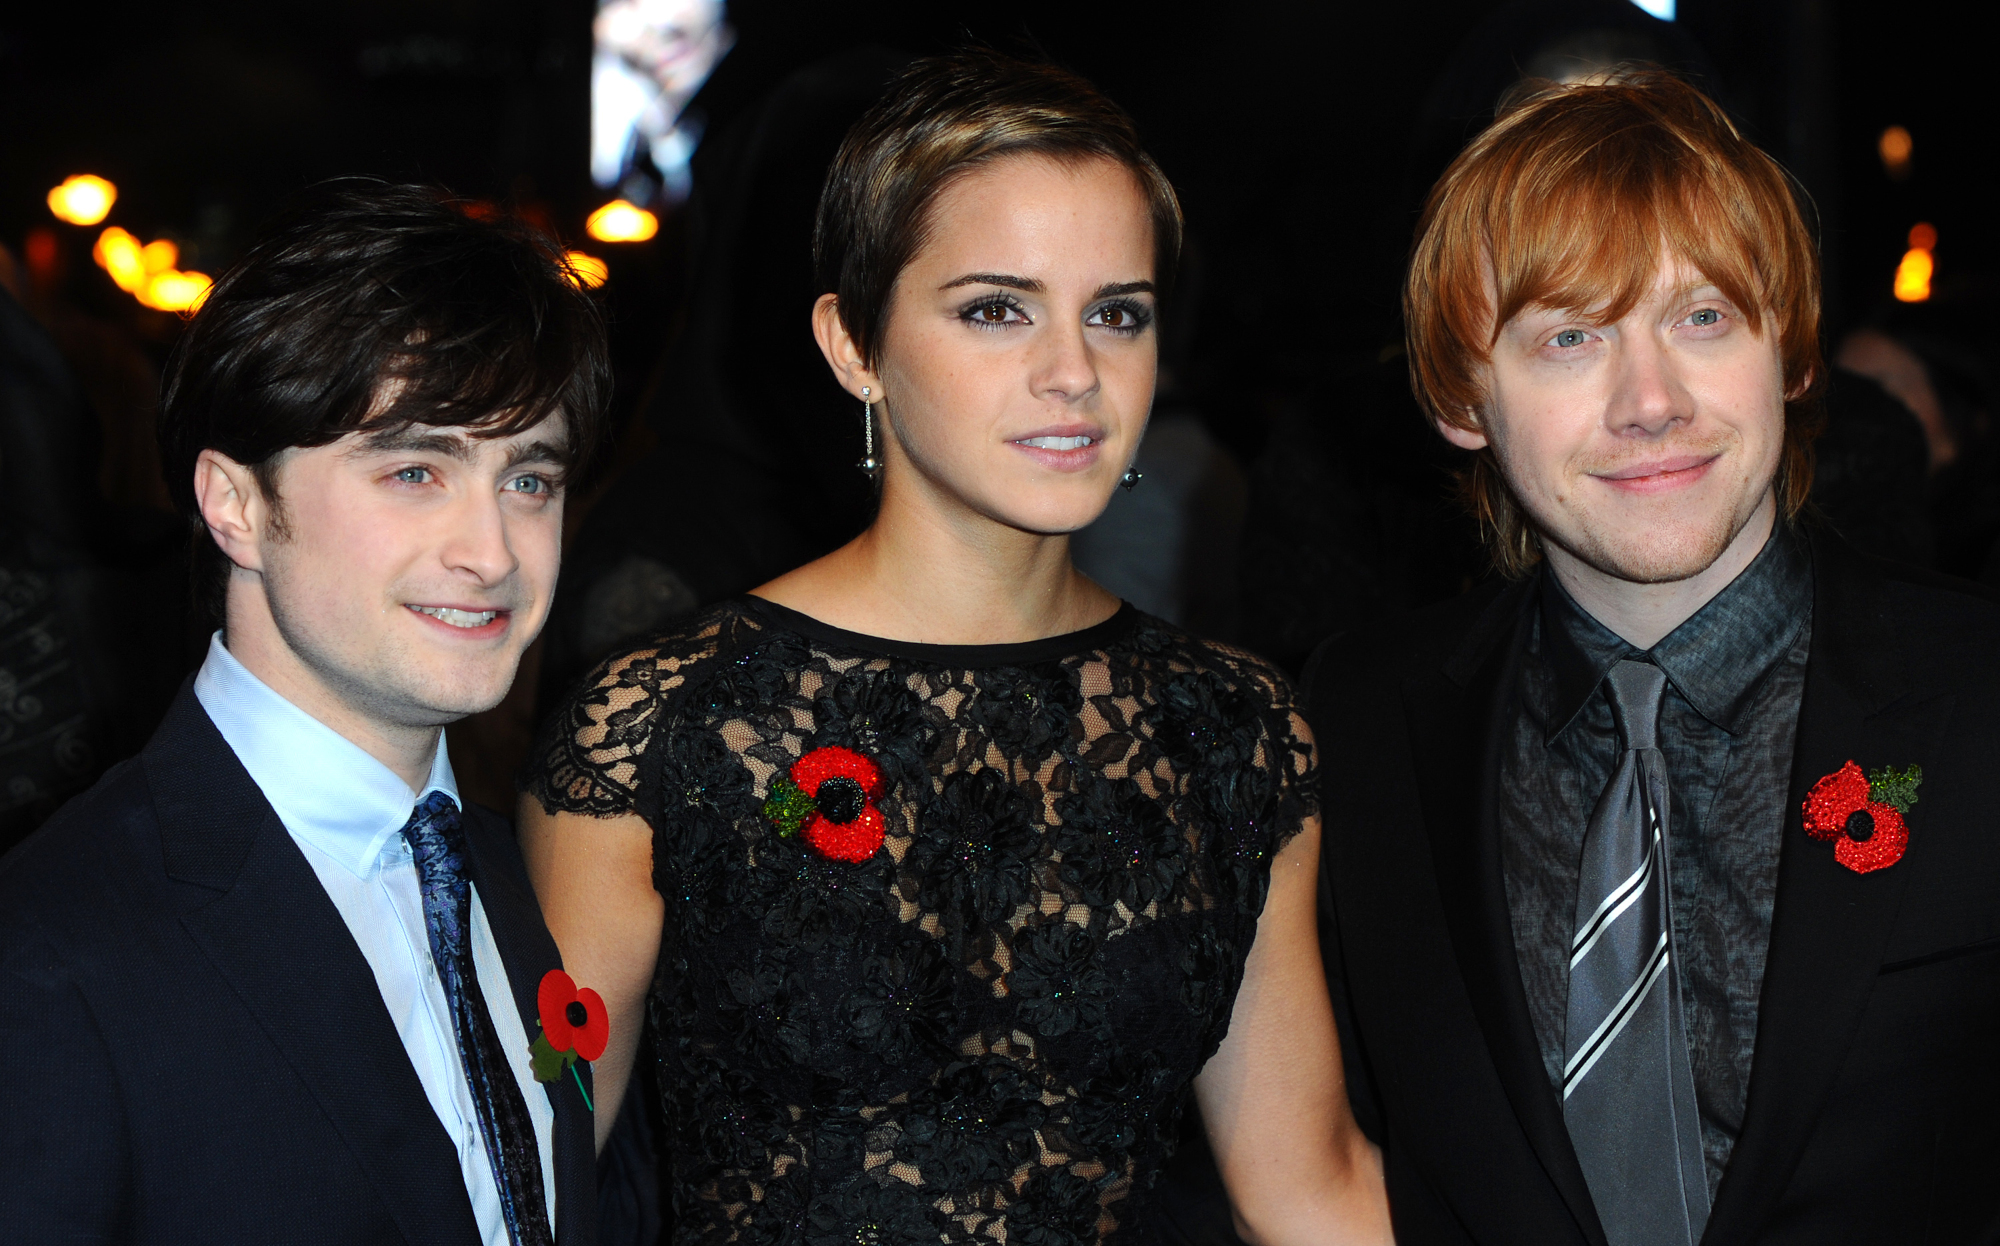 'Harry Potter' cast members Daniel Radcliffe, Emma Watson, and Rupert Grint. They're standing next to one another. Radcliffe and Grint are wearing black suits, and Watson is wearing a black dress.